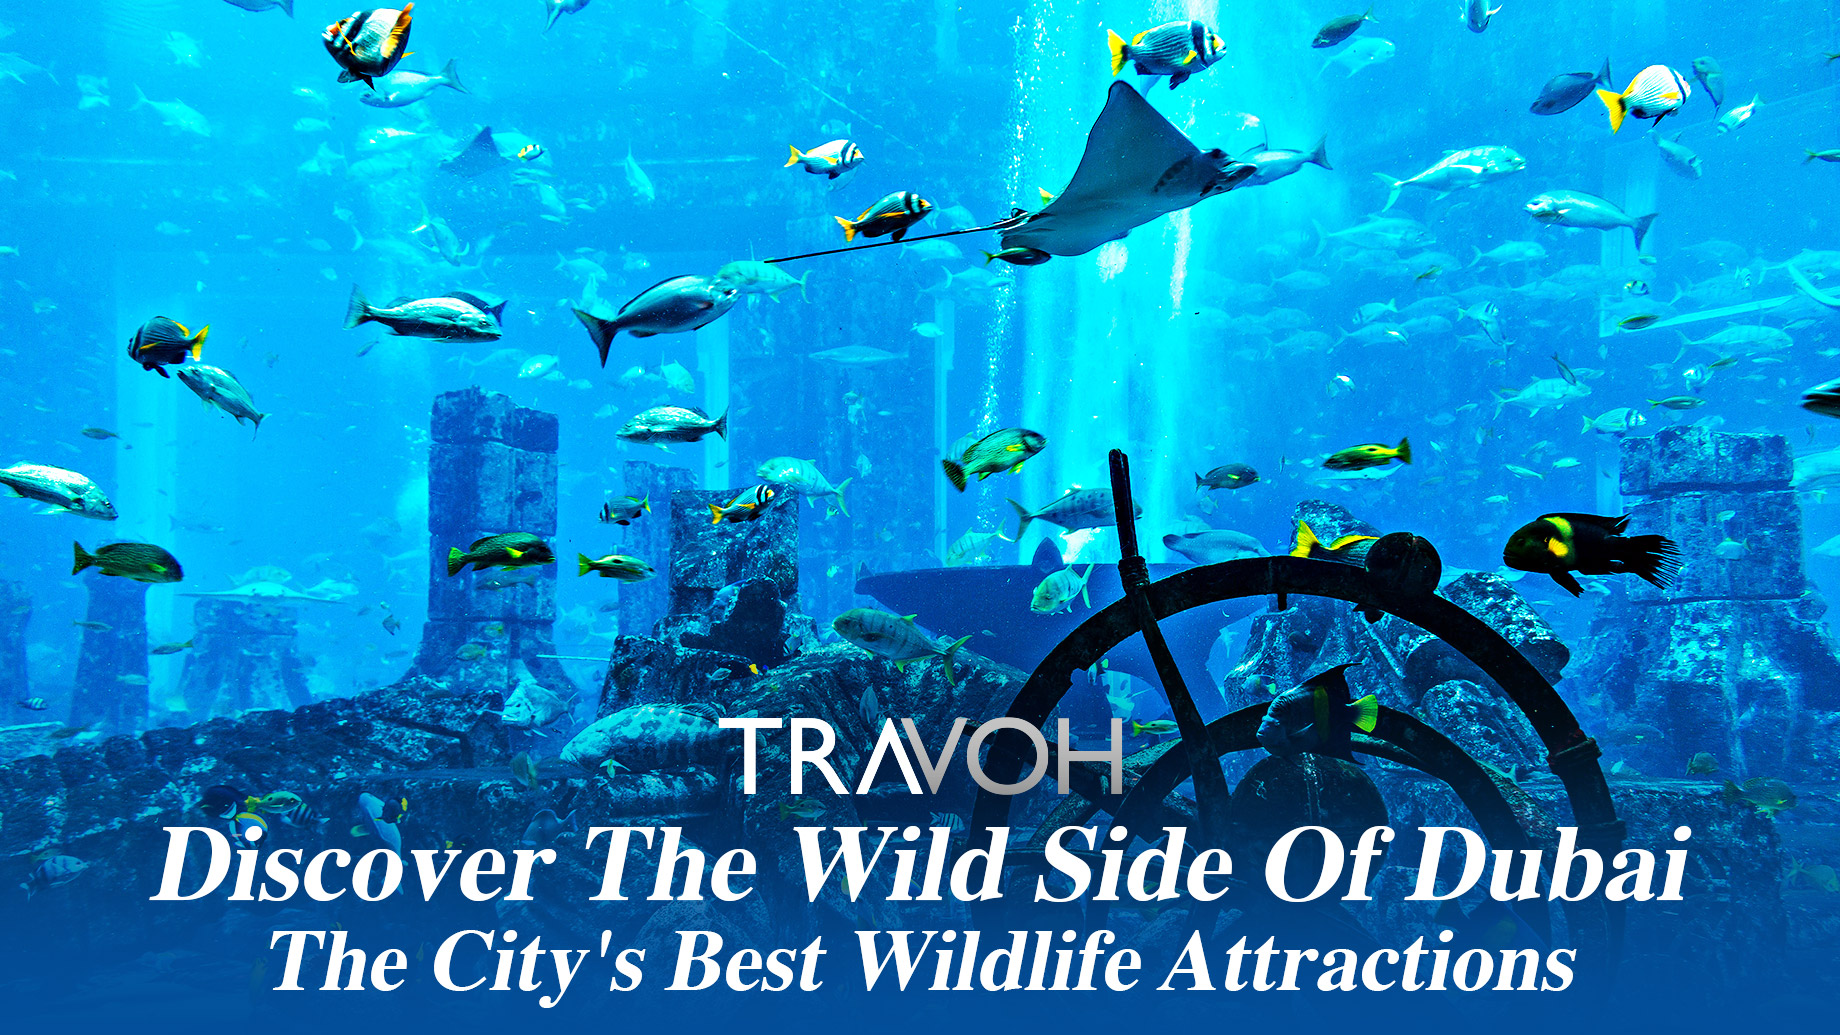 Discover The Wild Side Of Dubai: The City's Best Wildlife Attractions